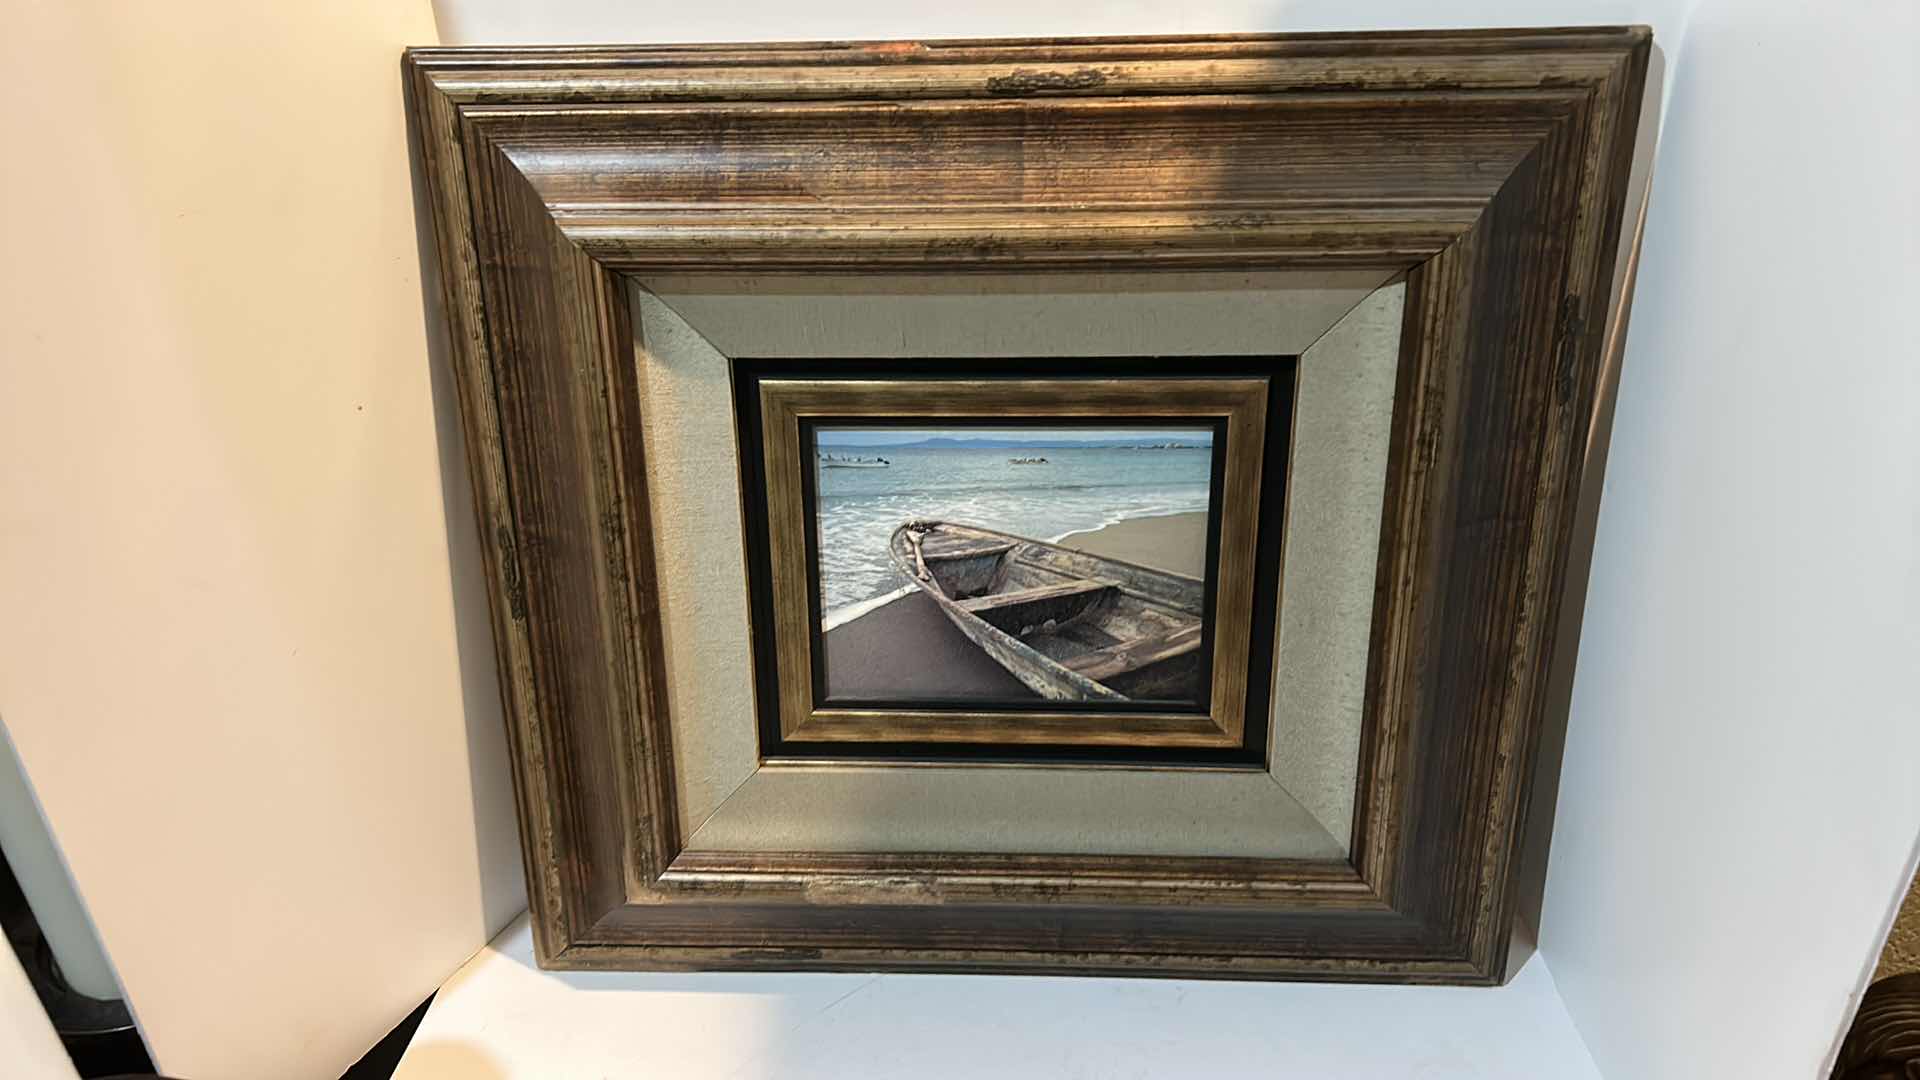 Photo 2 of WALL DECOR  -" BEACHED BOAT" ON SHORE ARTWORK IN WOOD FRAME 24” x 22”